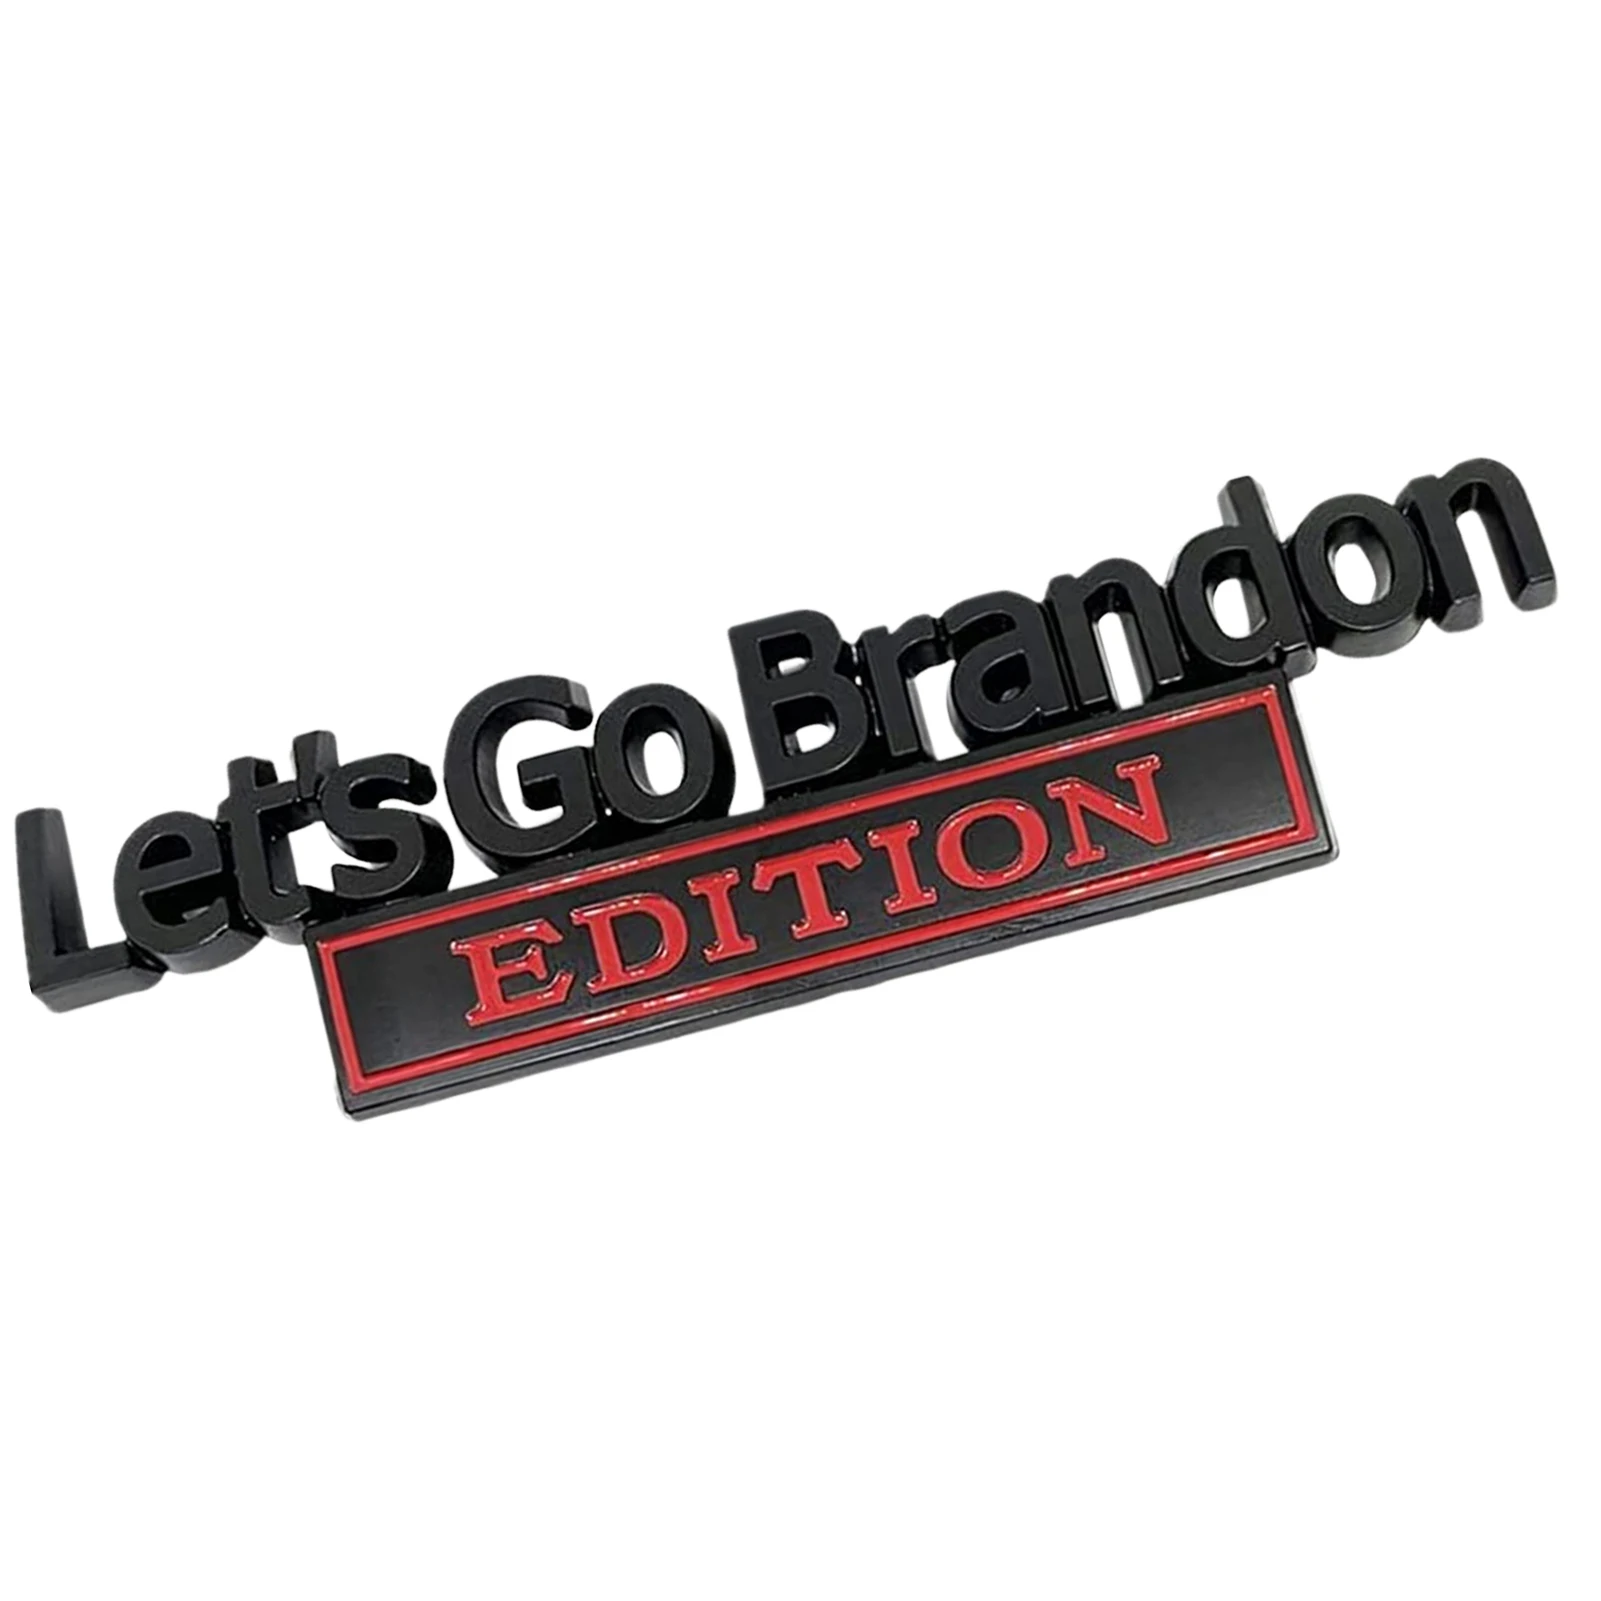 

Car Styling Metal Decals Let's-Go-Brandon EDITION Logo Alloy Car Emblem 3D Badge Sticker Decal Auto Accessory For Rear Tailgate